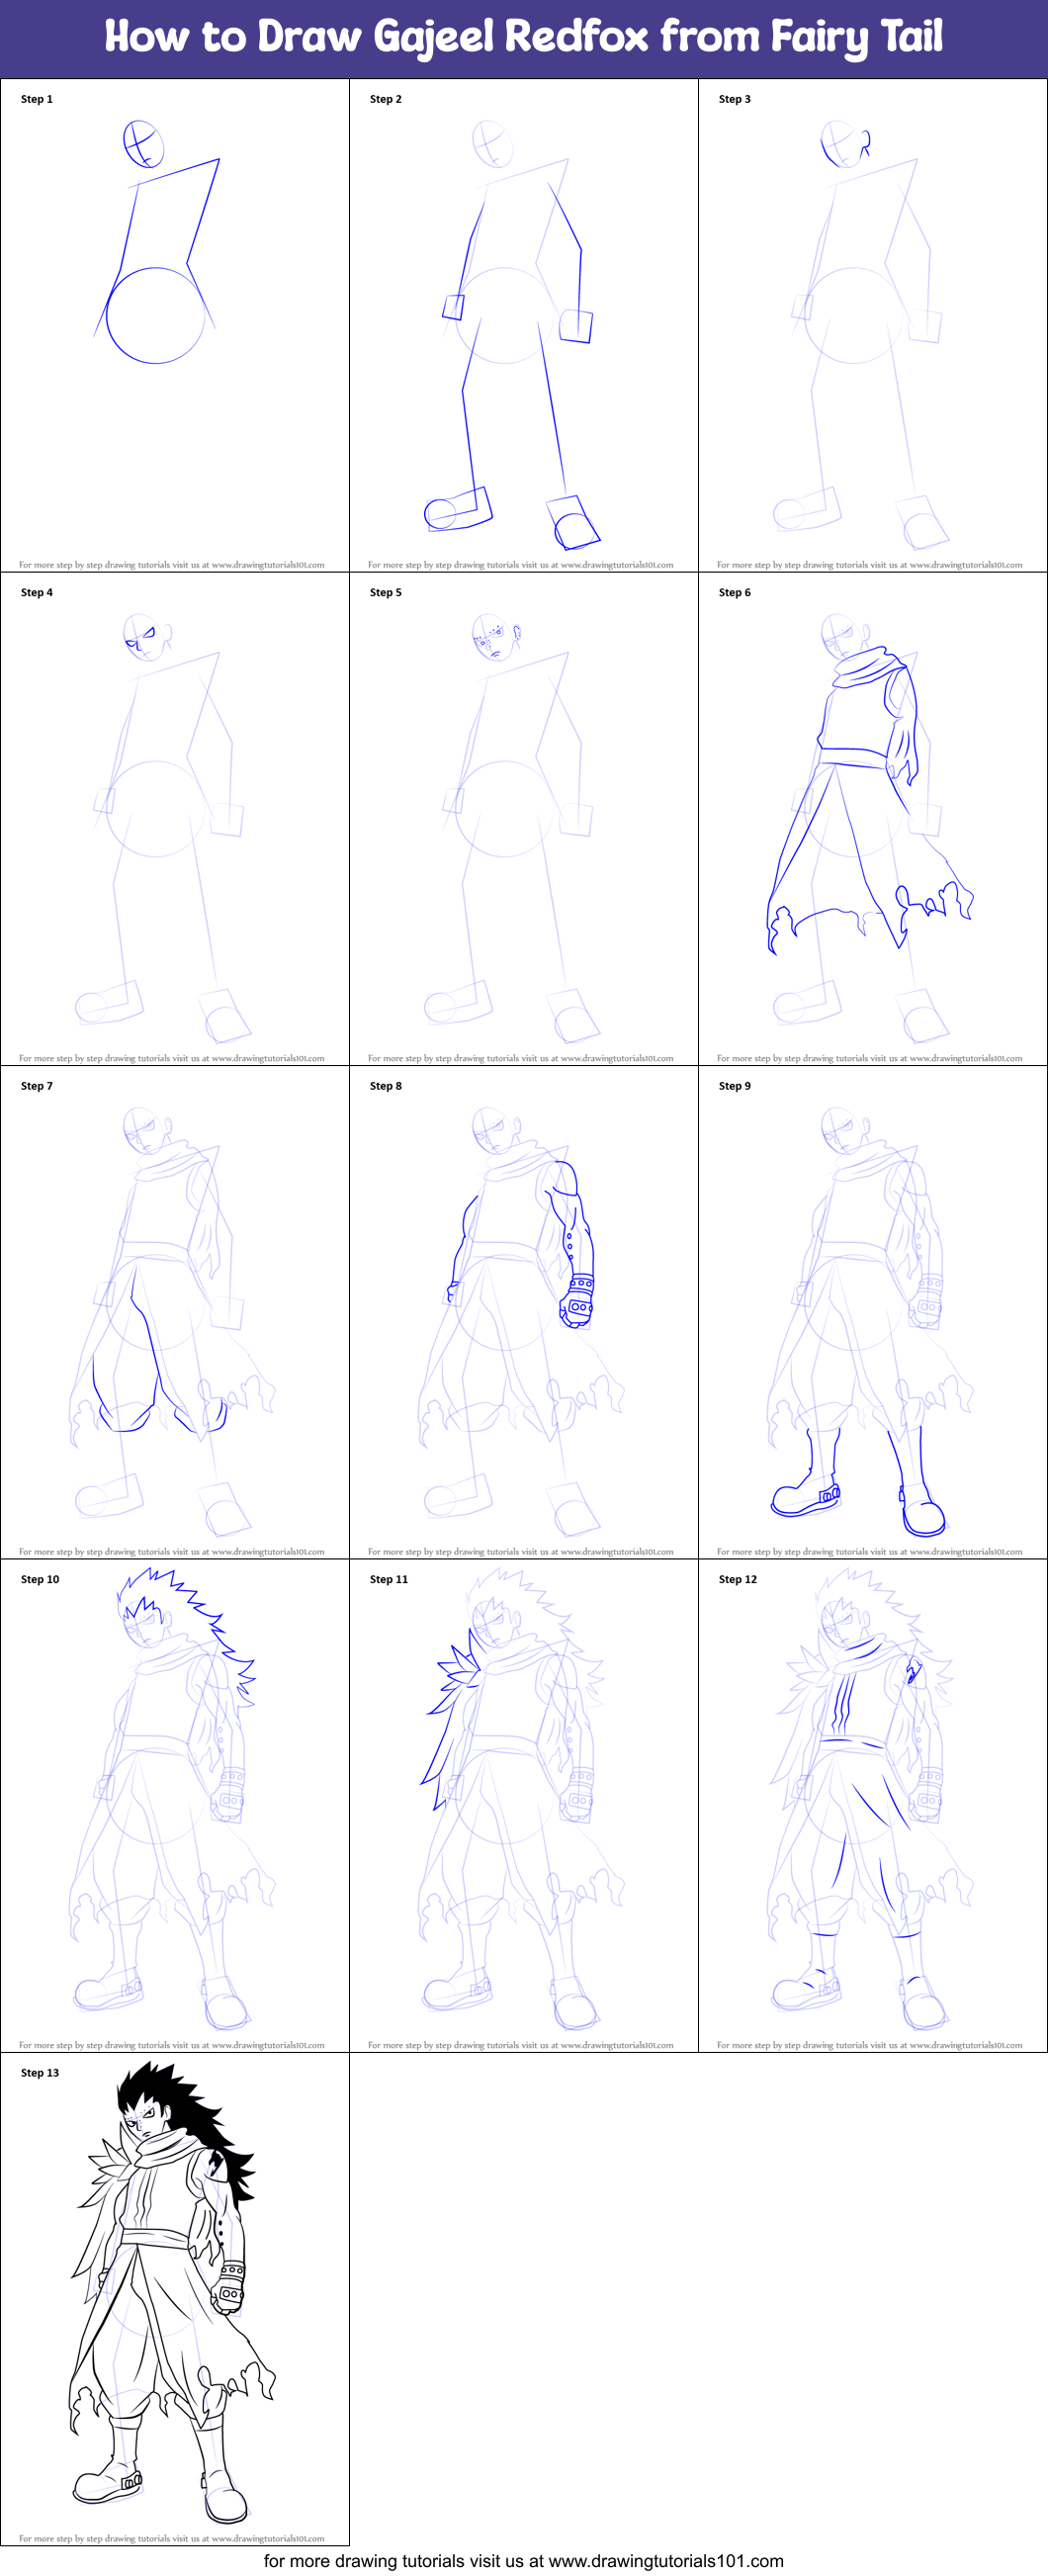 How to Draw Gajeel Redfox from Fairy Tail printable step by step